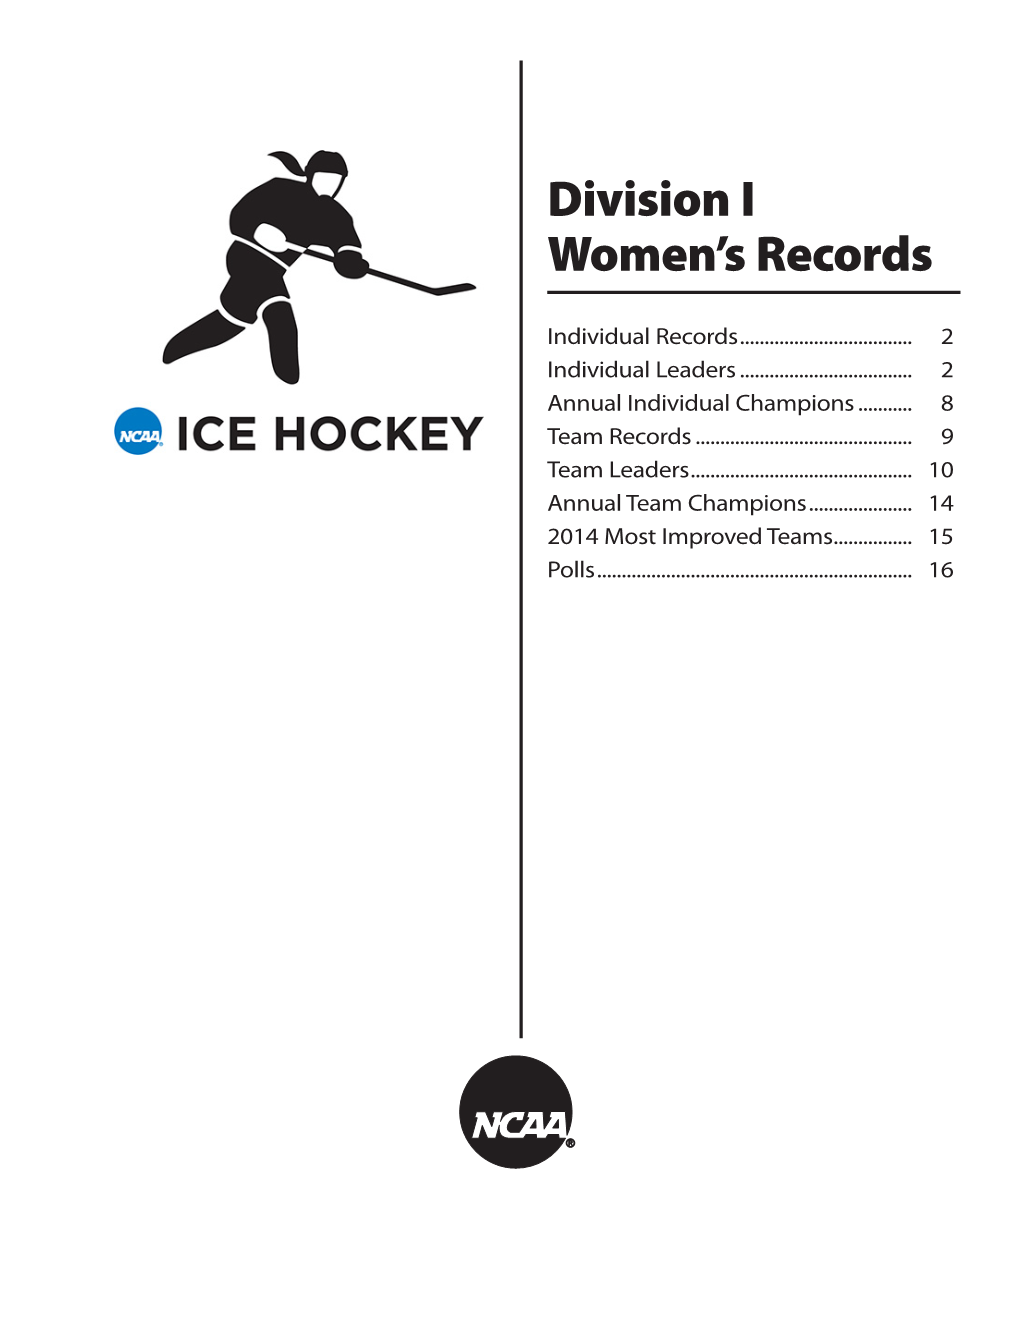 Division I Women's Records